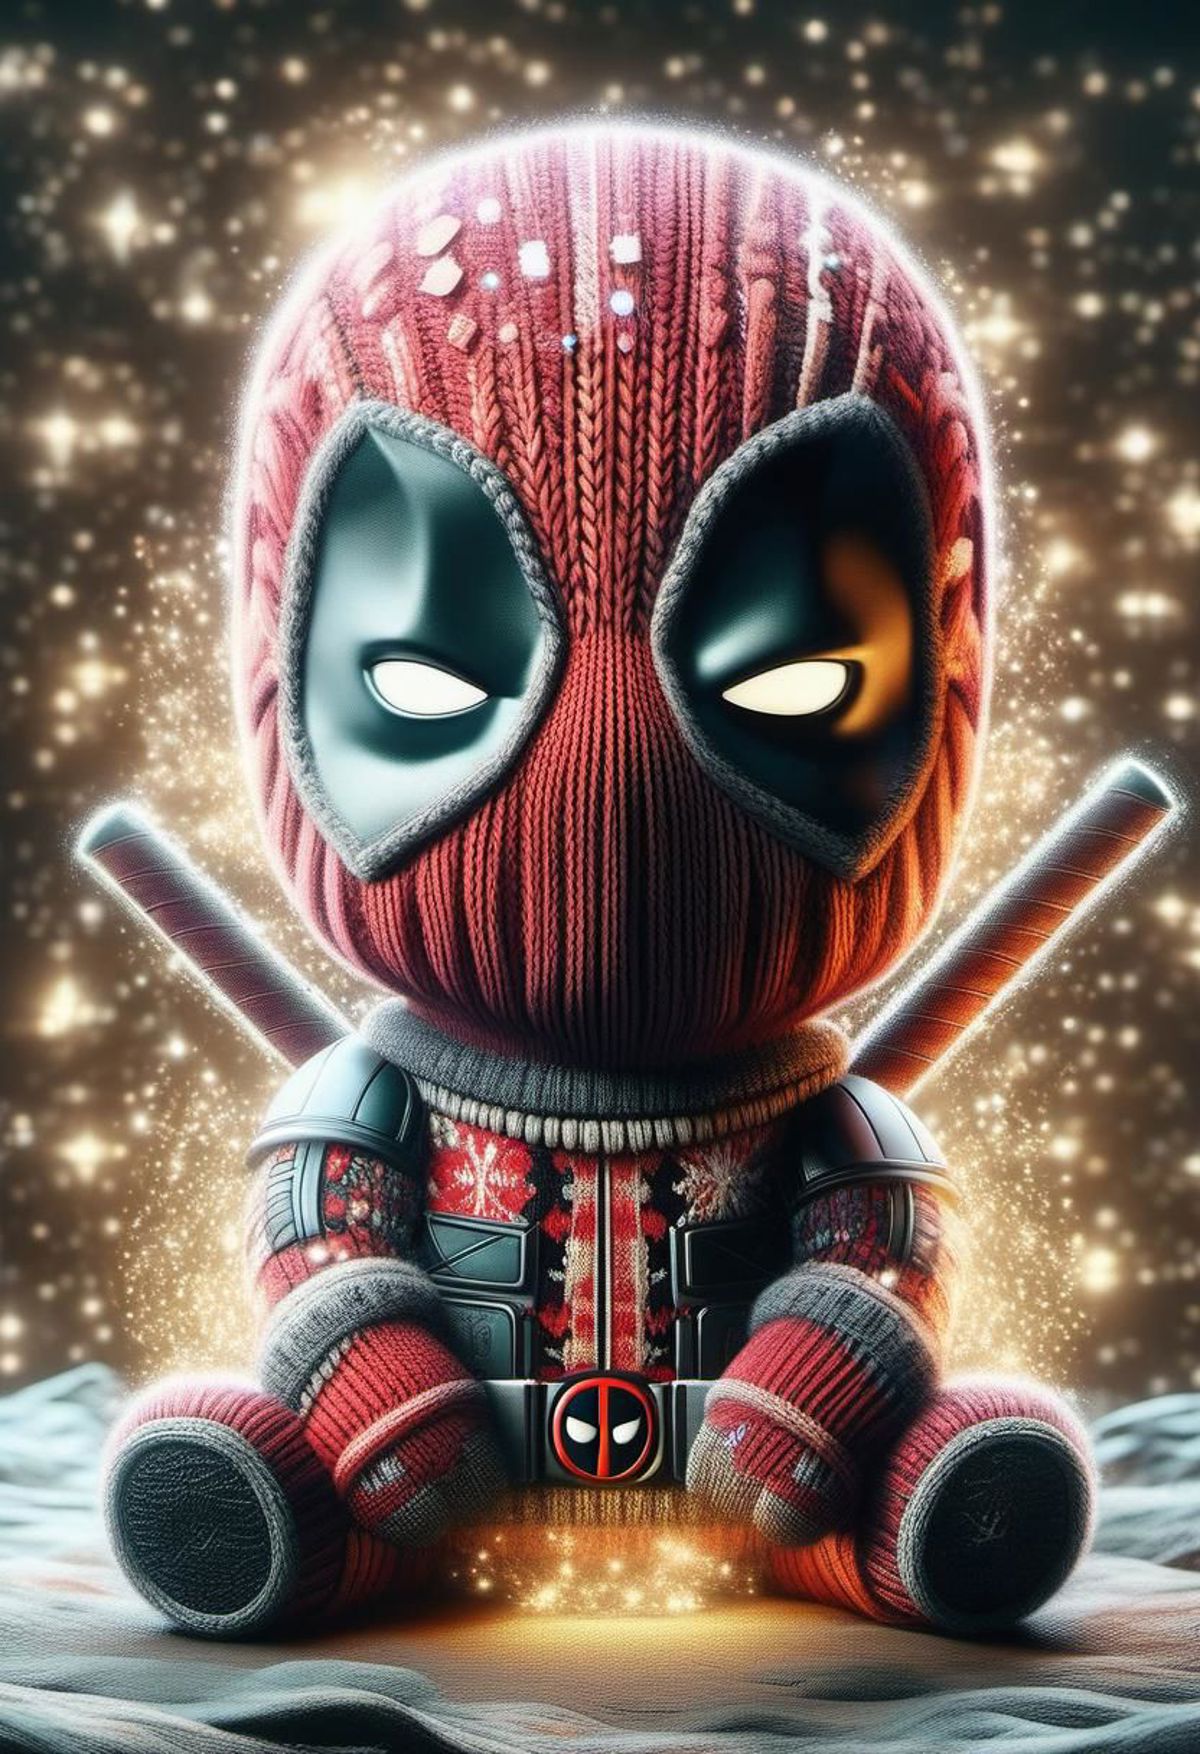 A Deadpool toy with a knitted sweater and a sword.